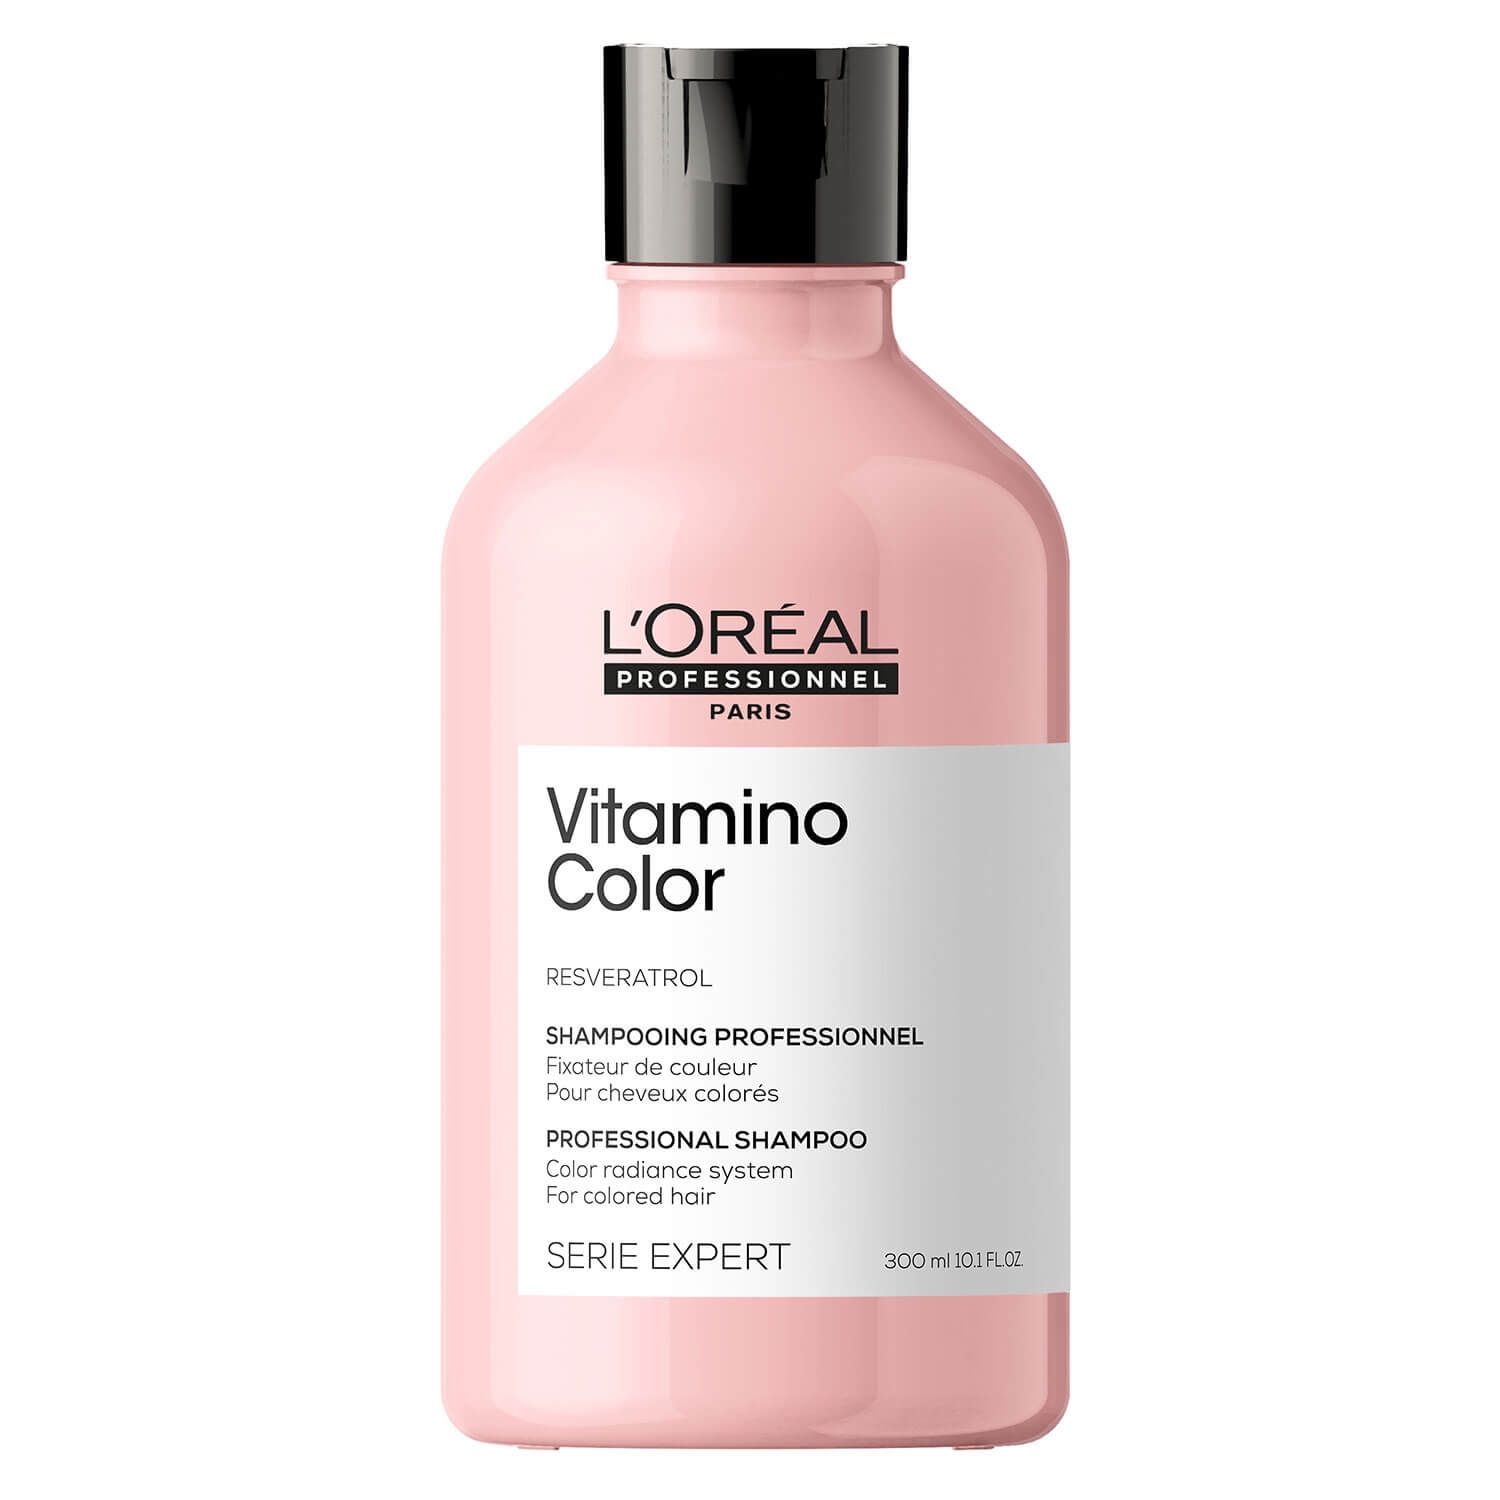 Product image from Série Expert Vitamino Color - Professional Shampoo